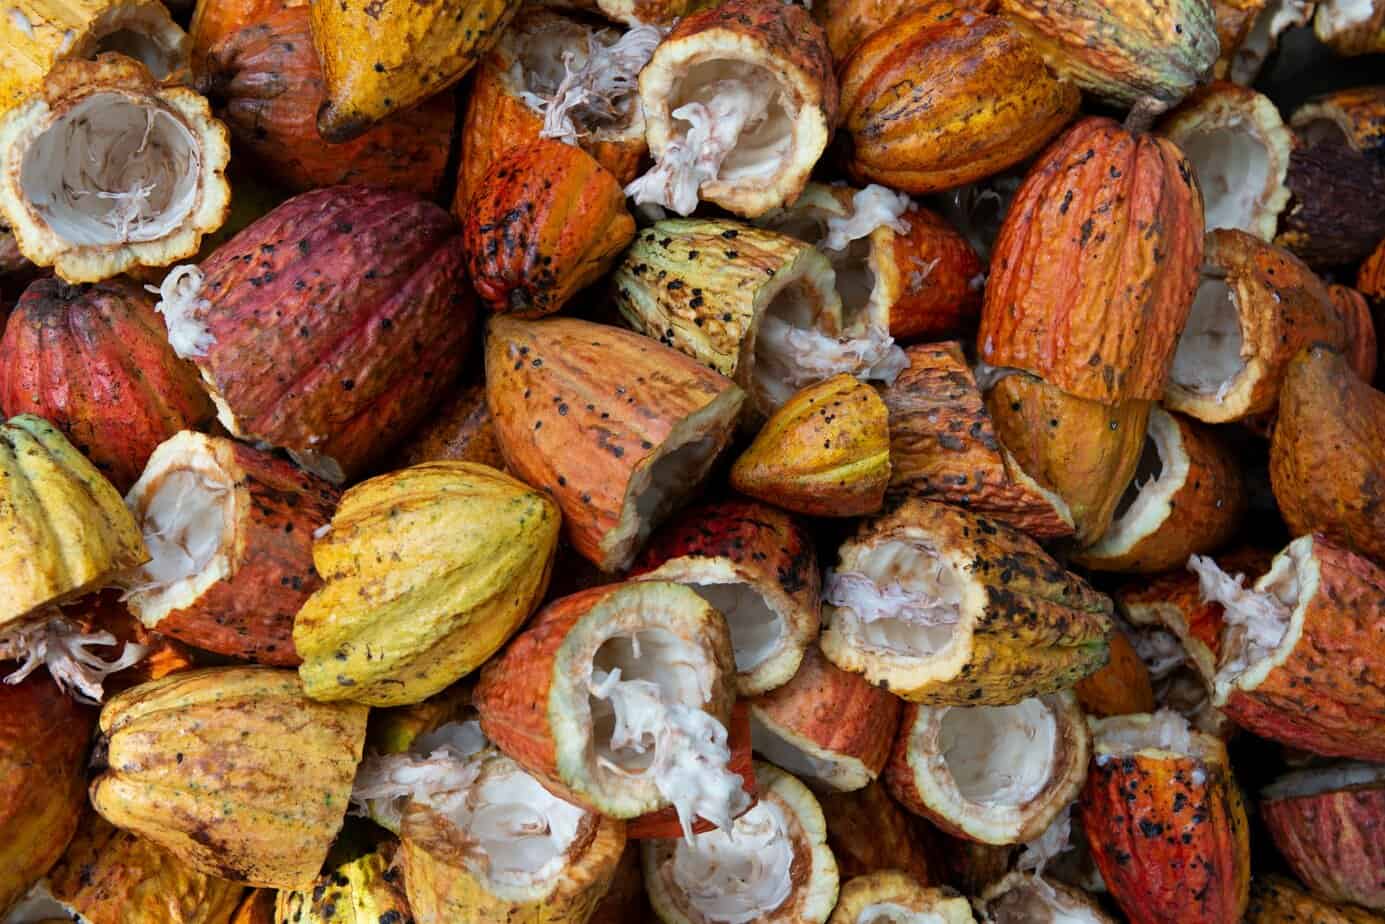 Ceremonial Cacao: The New Superfood?